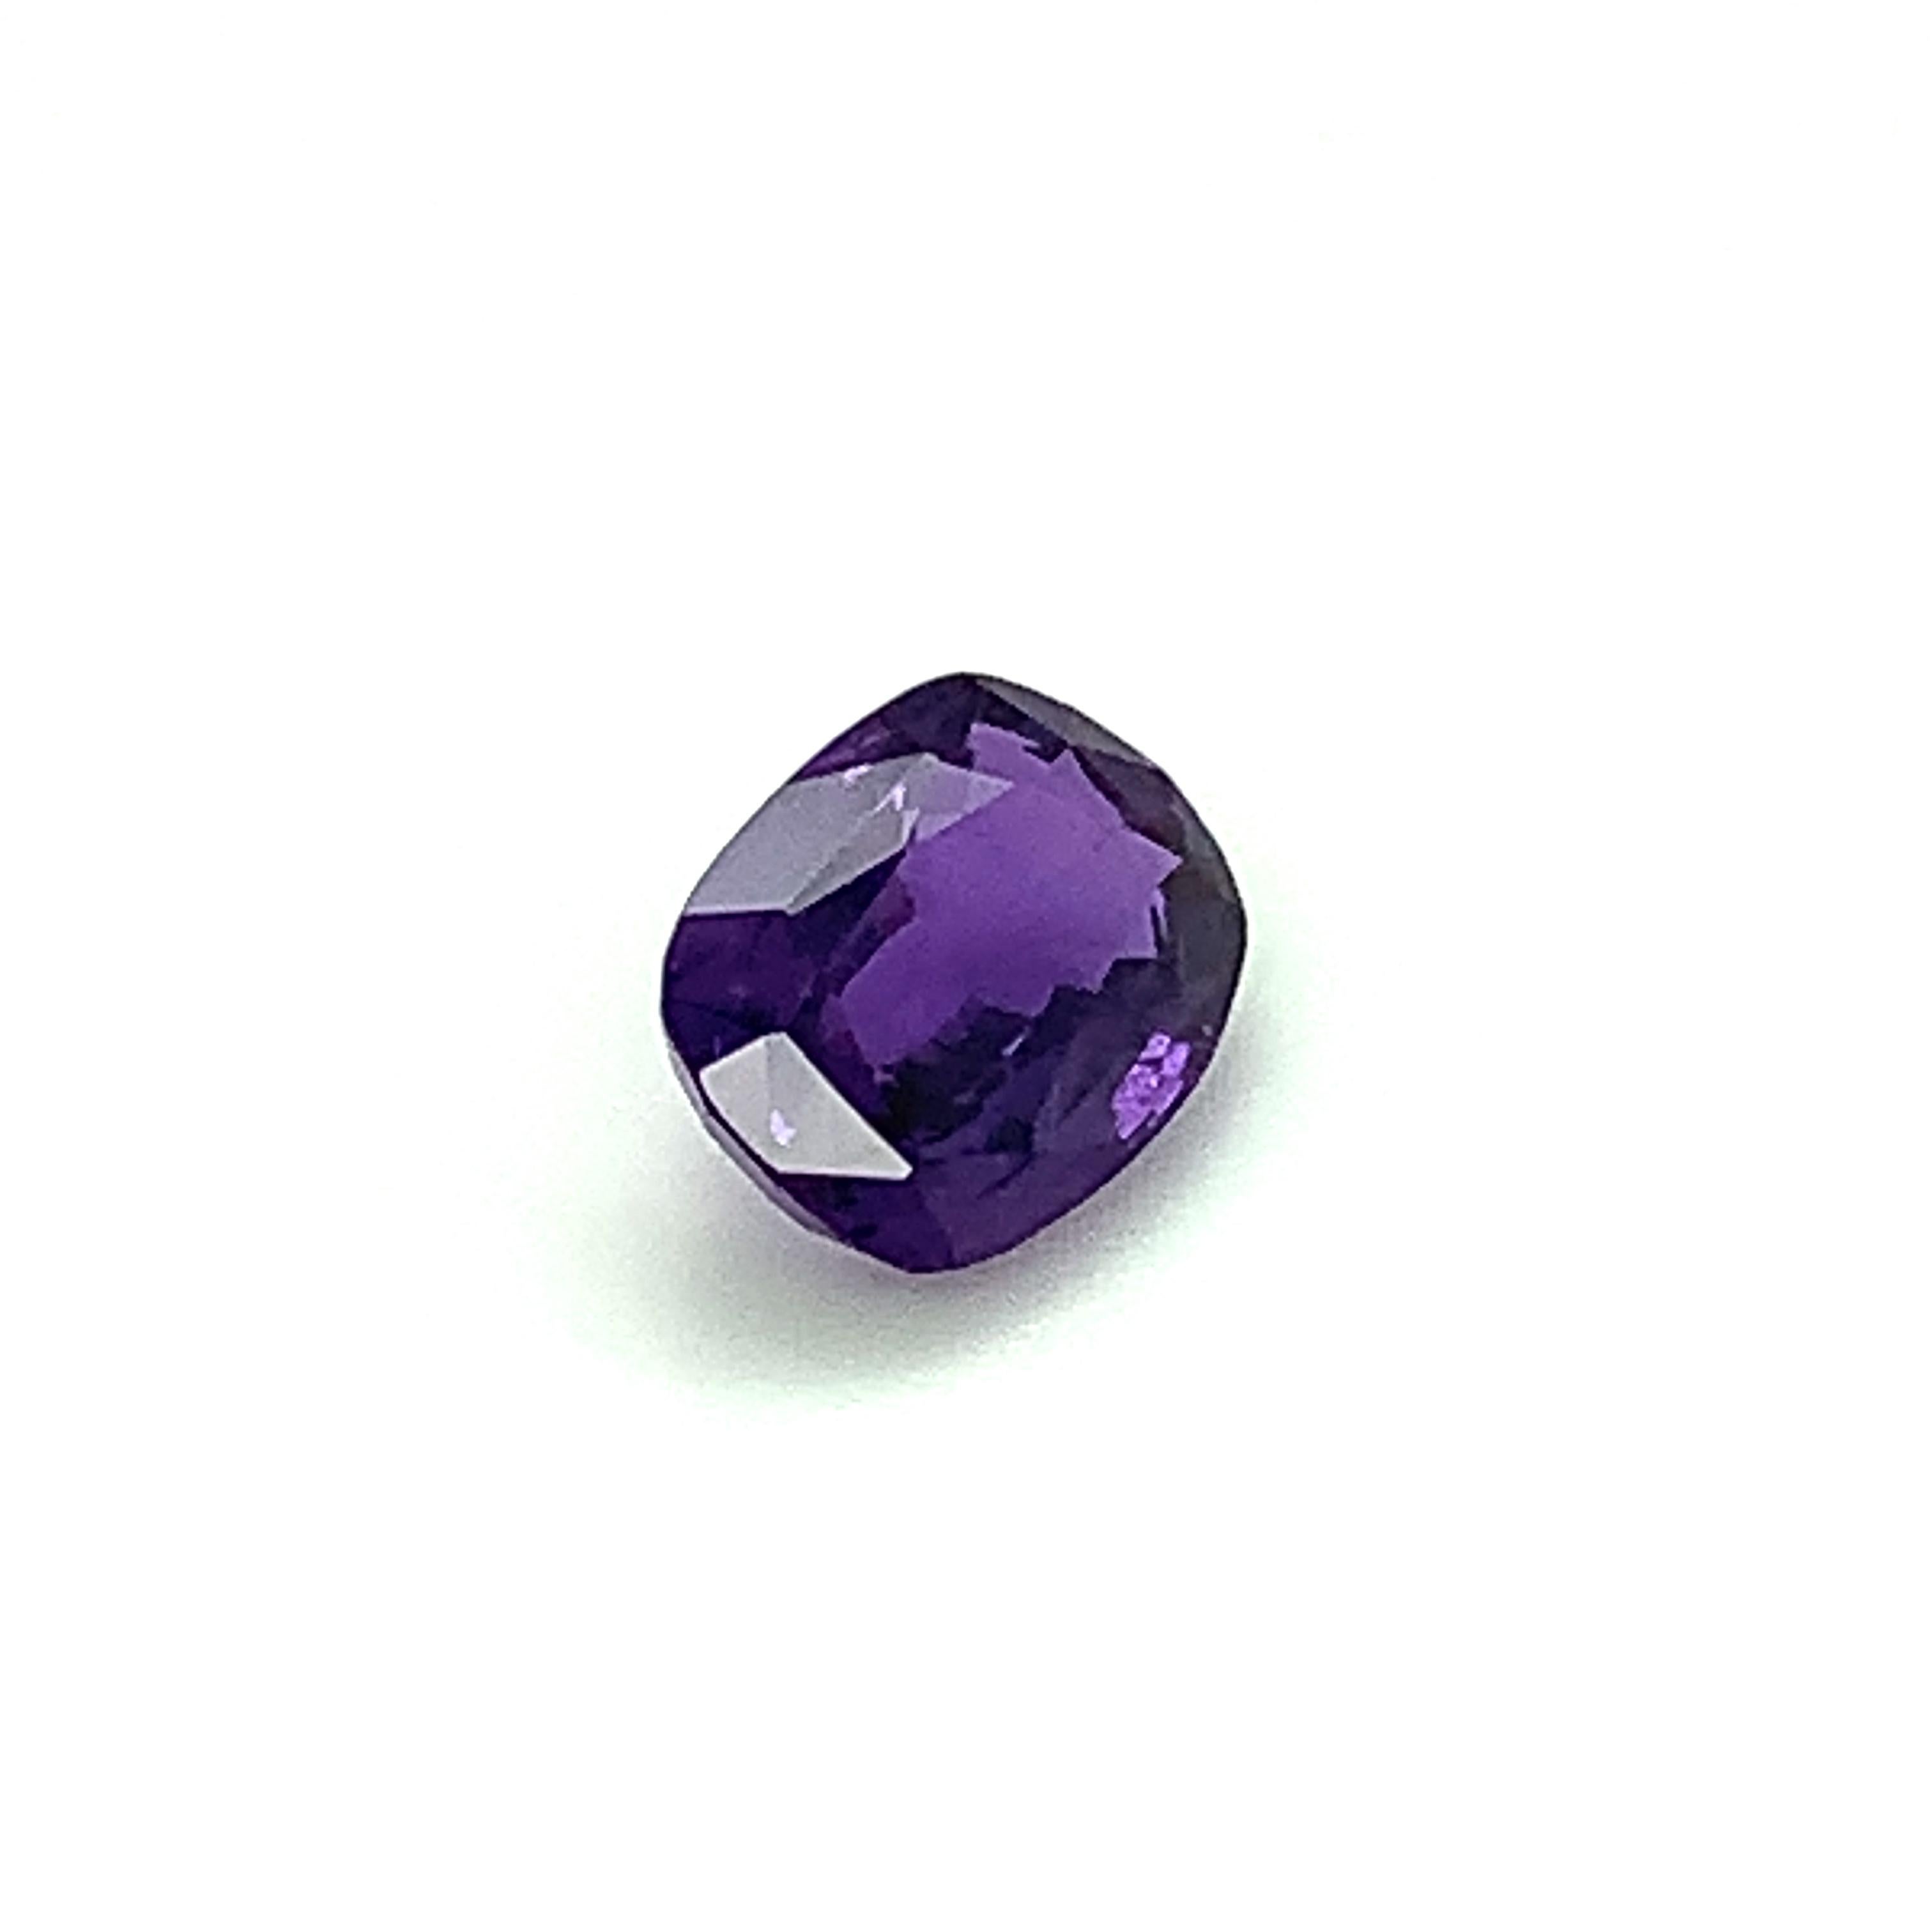 Cushion Cut Unheated 3.50 Carat Color Change Sapphire, Unset Loose Gemstone, GIA Certified